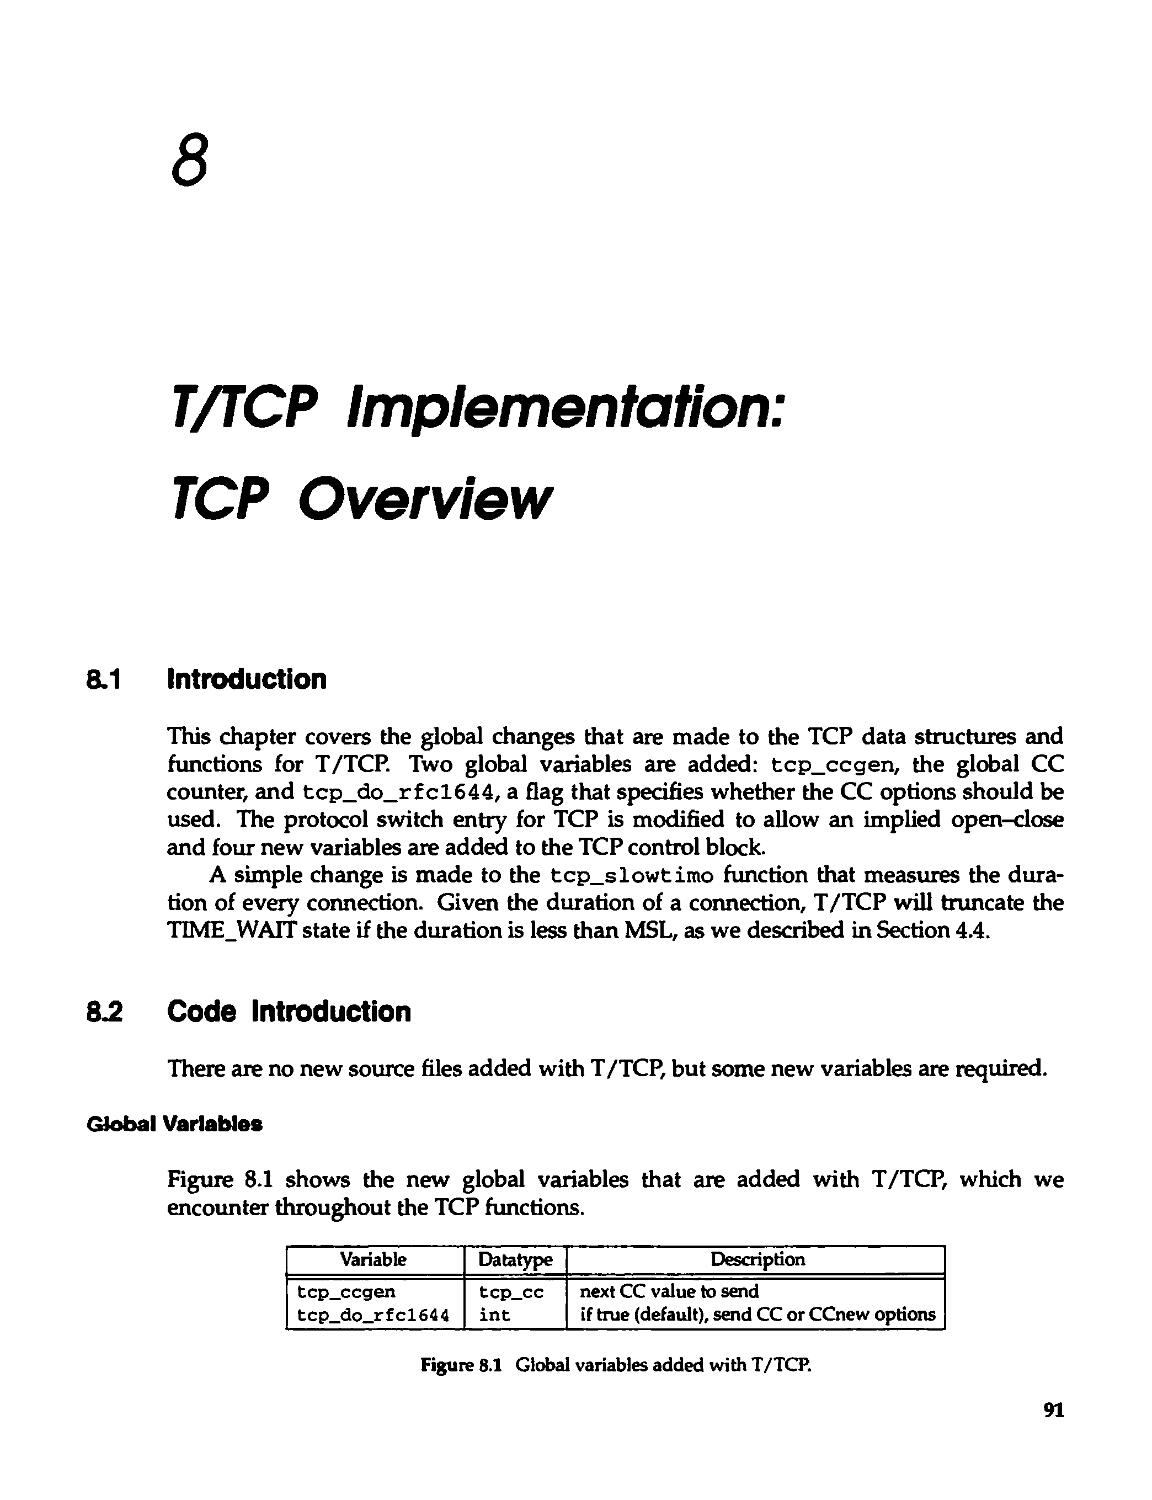 Chapter 8. T/TCP implementation: TCP Overview
8.2 Code Introduction